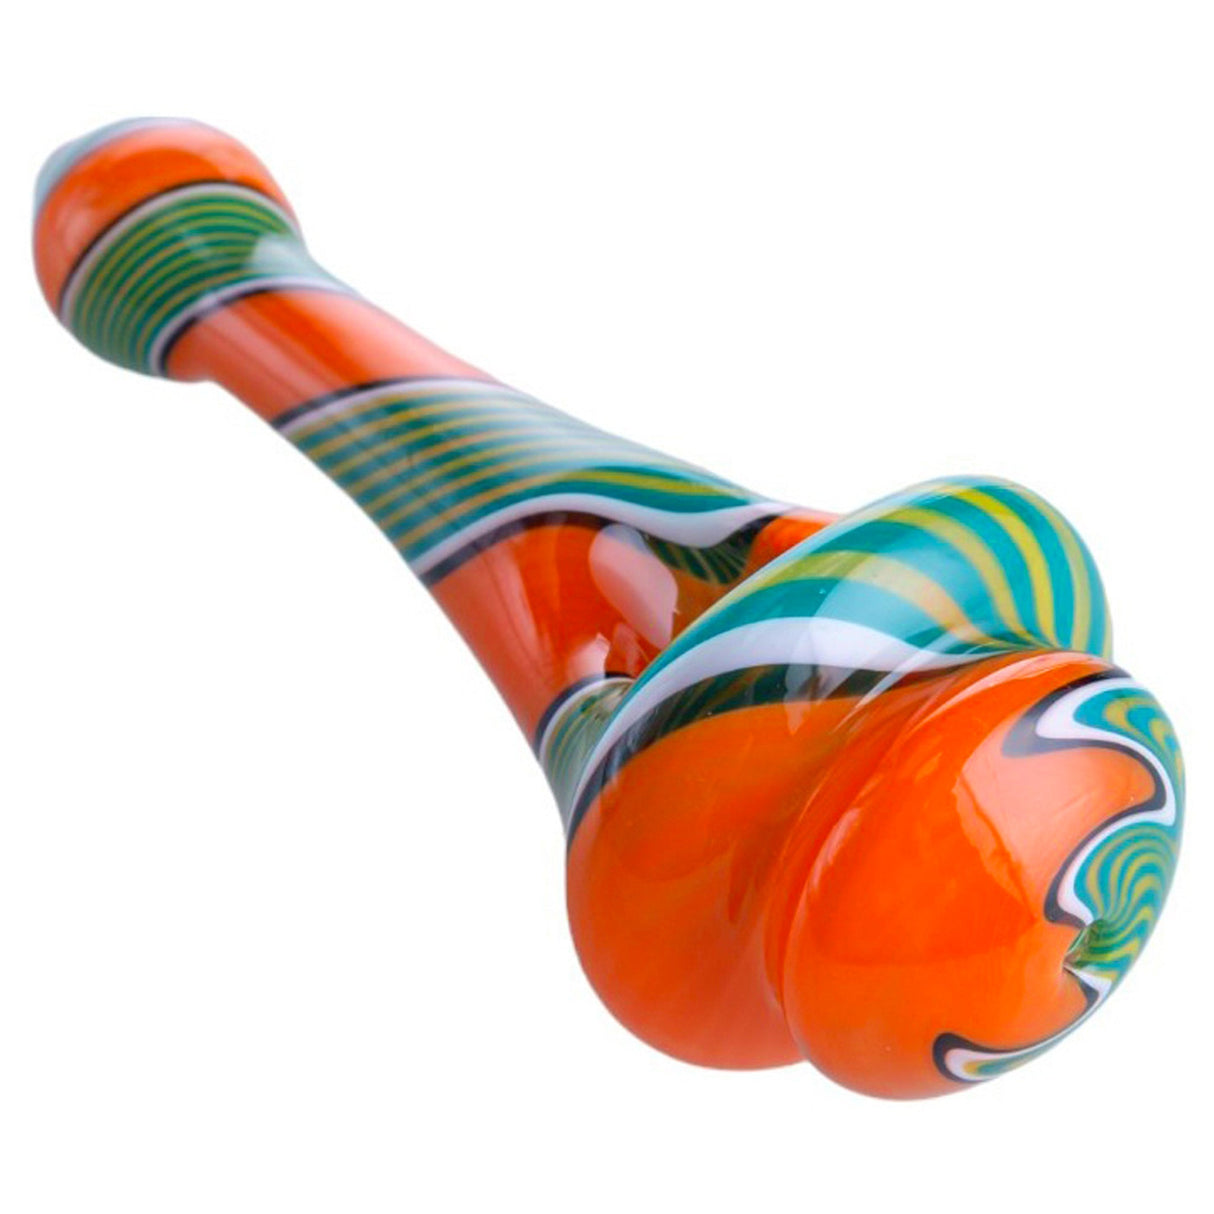 Crush Spinning Top Pipe in Orange Stripe, Angled Side View, Compact Handpipe Design